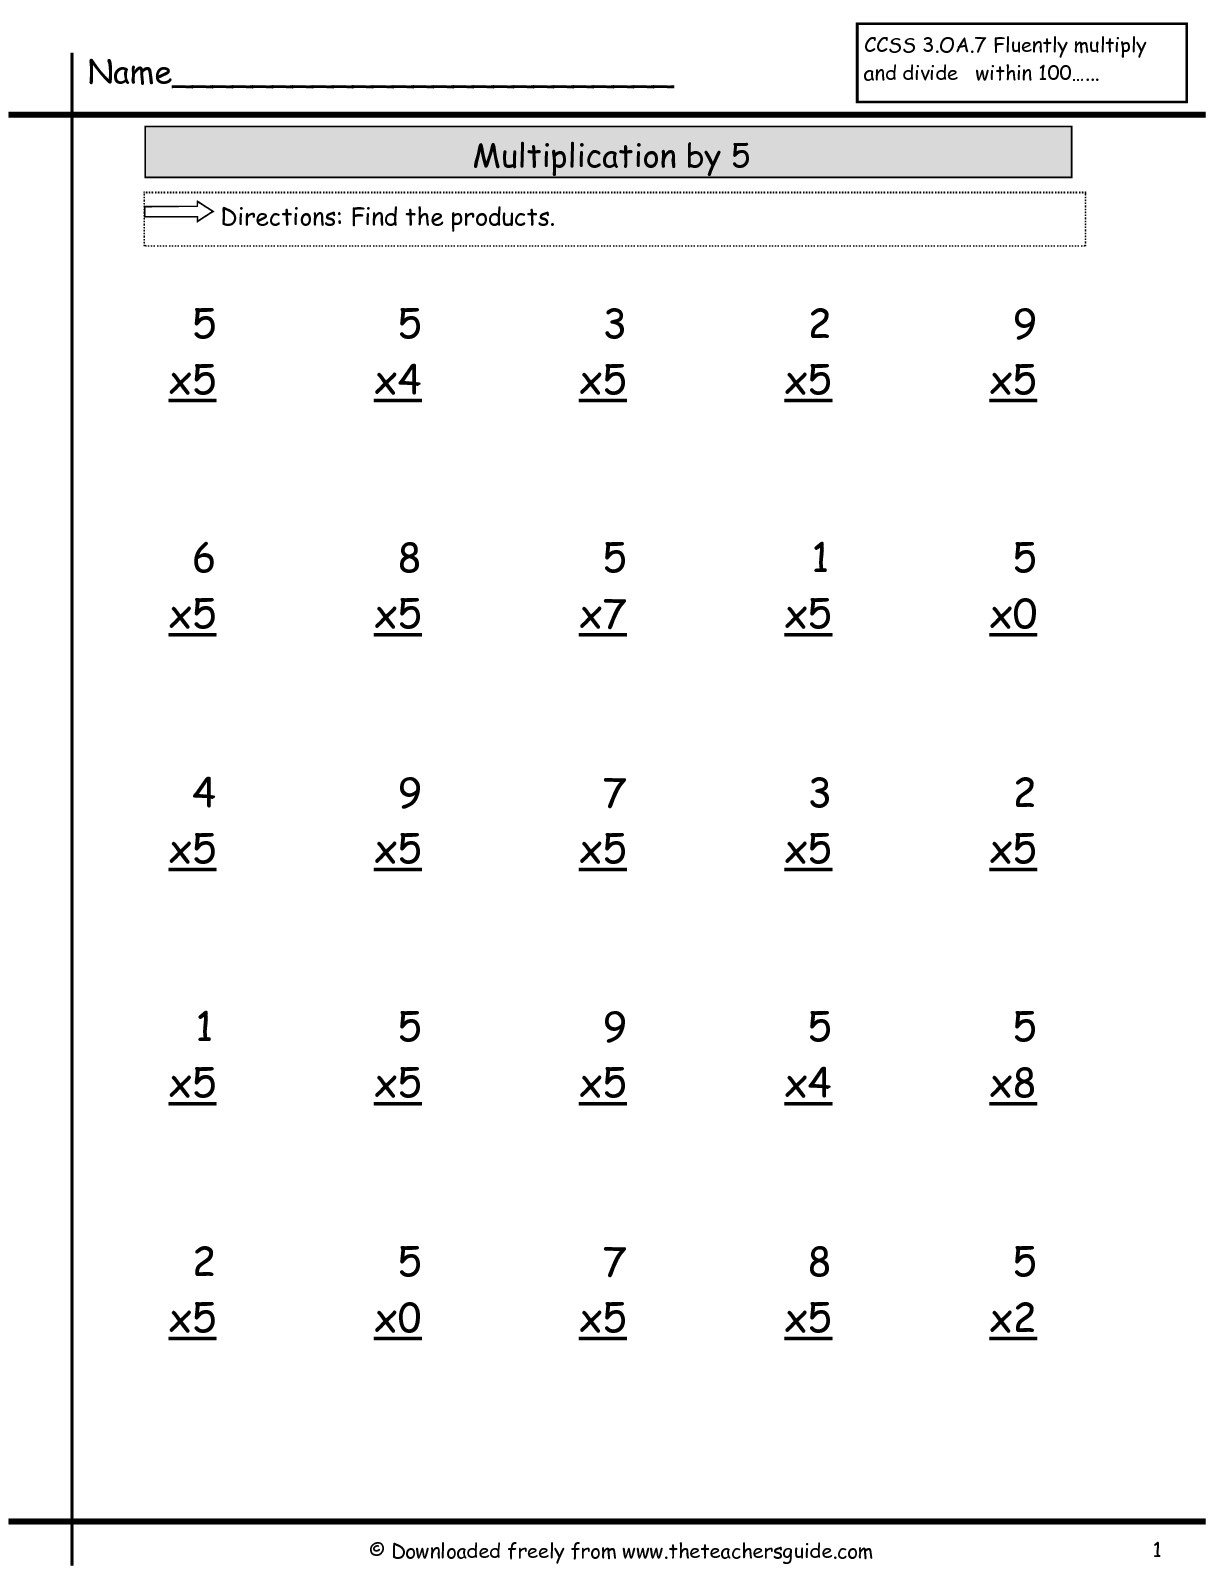 Multiplication Facts Worksheets From The Teacher&amp;#039;s Guide pertaining to 2 Multiplication Worksheets